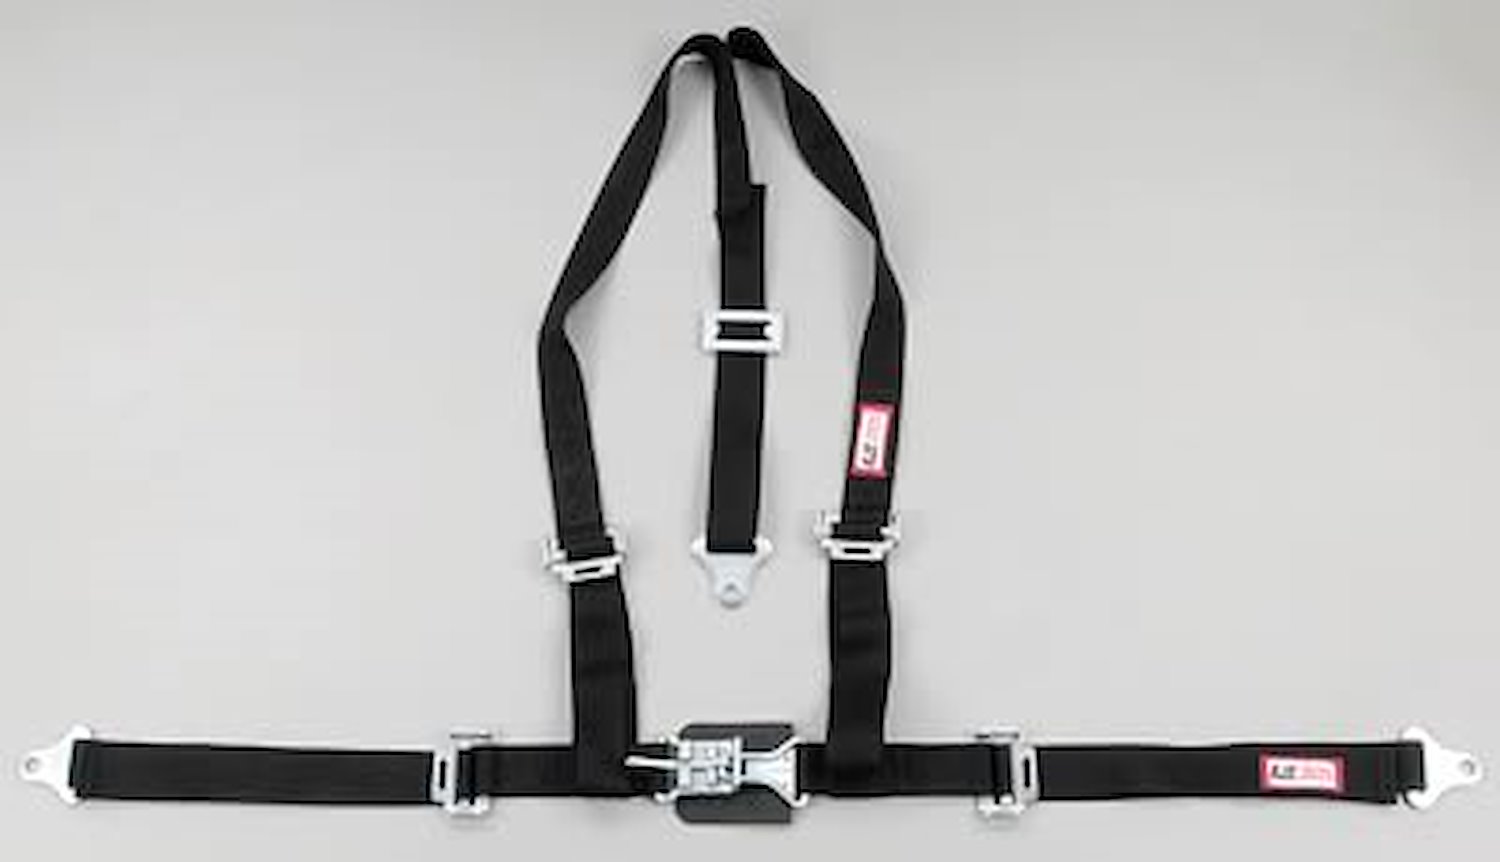 NON-SFI L&L HARNESS 3 PULL UP Lap Belt SEWN IN 2 S.H. Individual FLOOR Mount w/STERNUM STRAP ALL WRAP ENDS HOT PINK